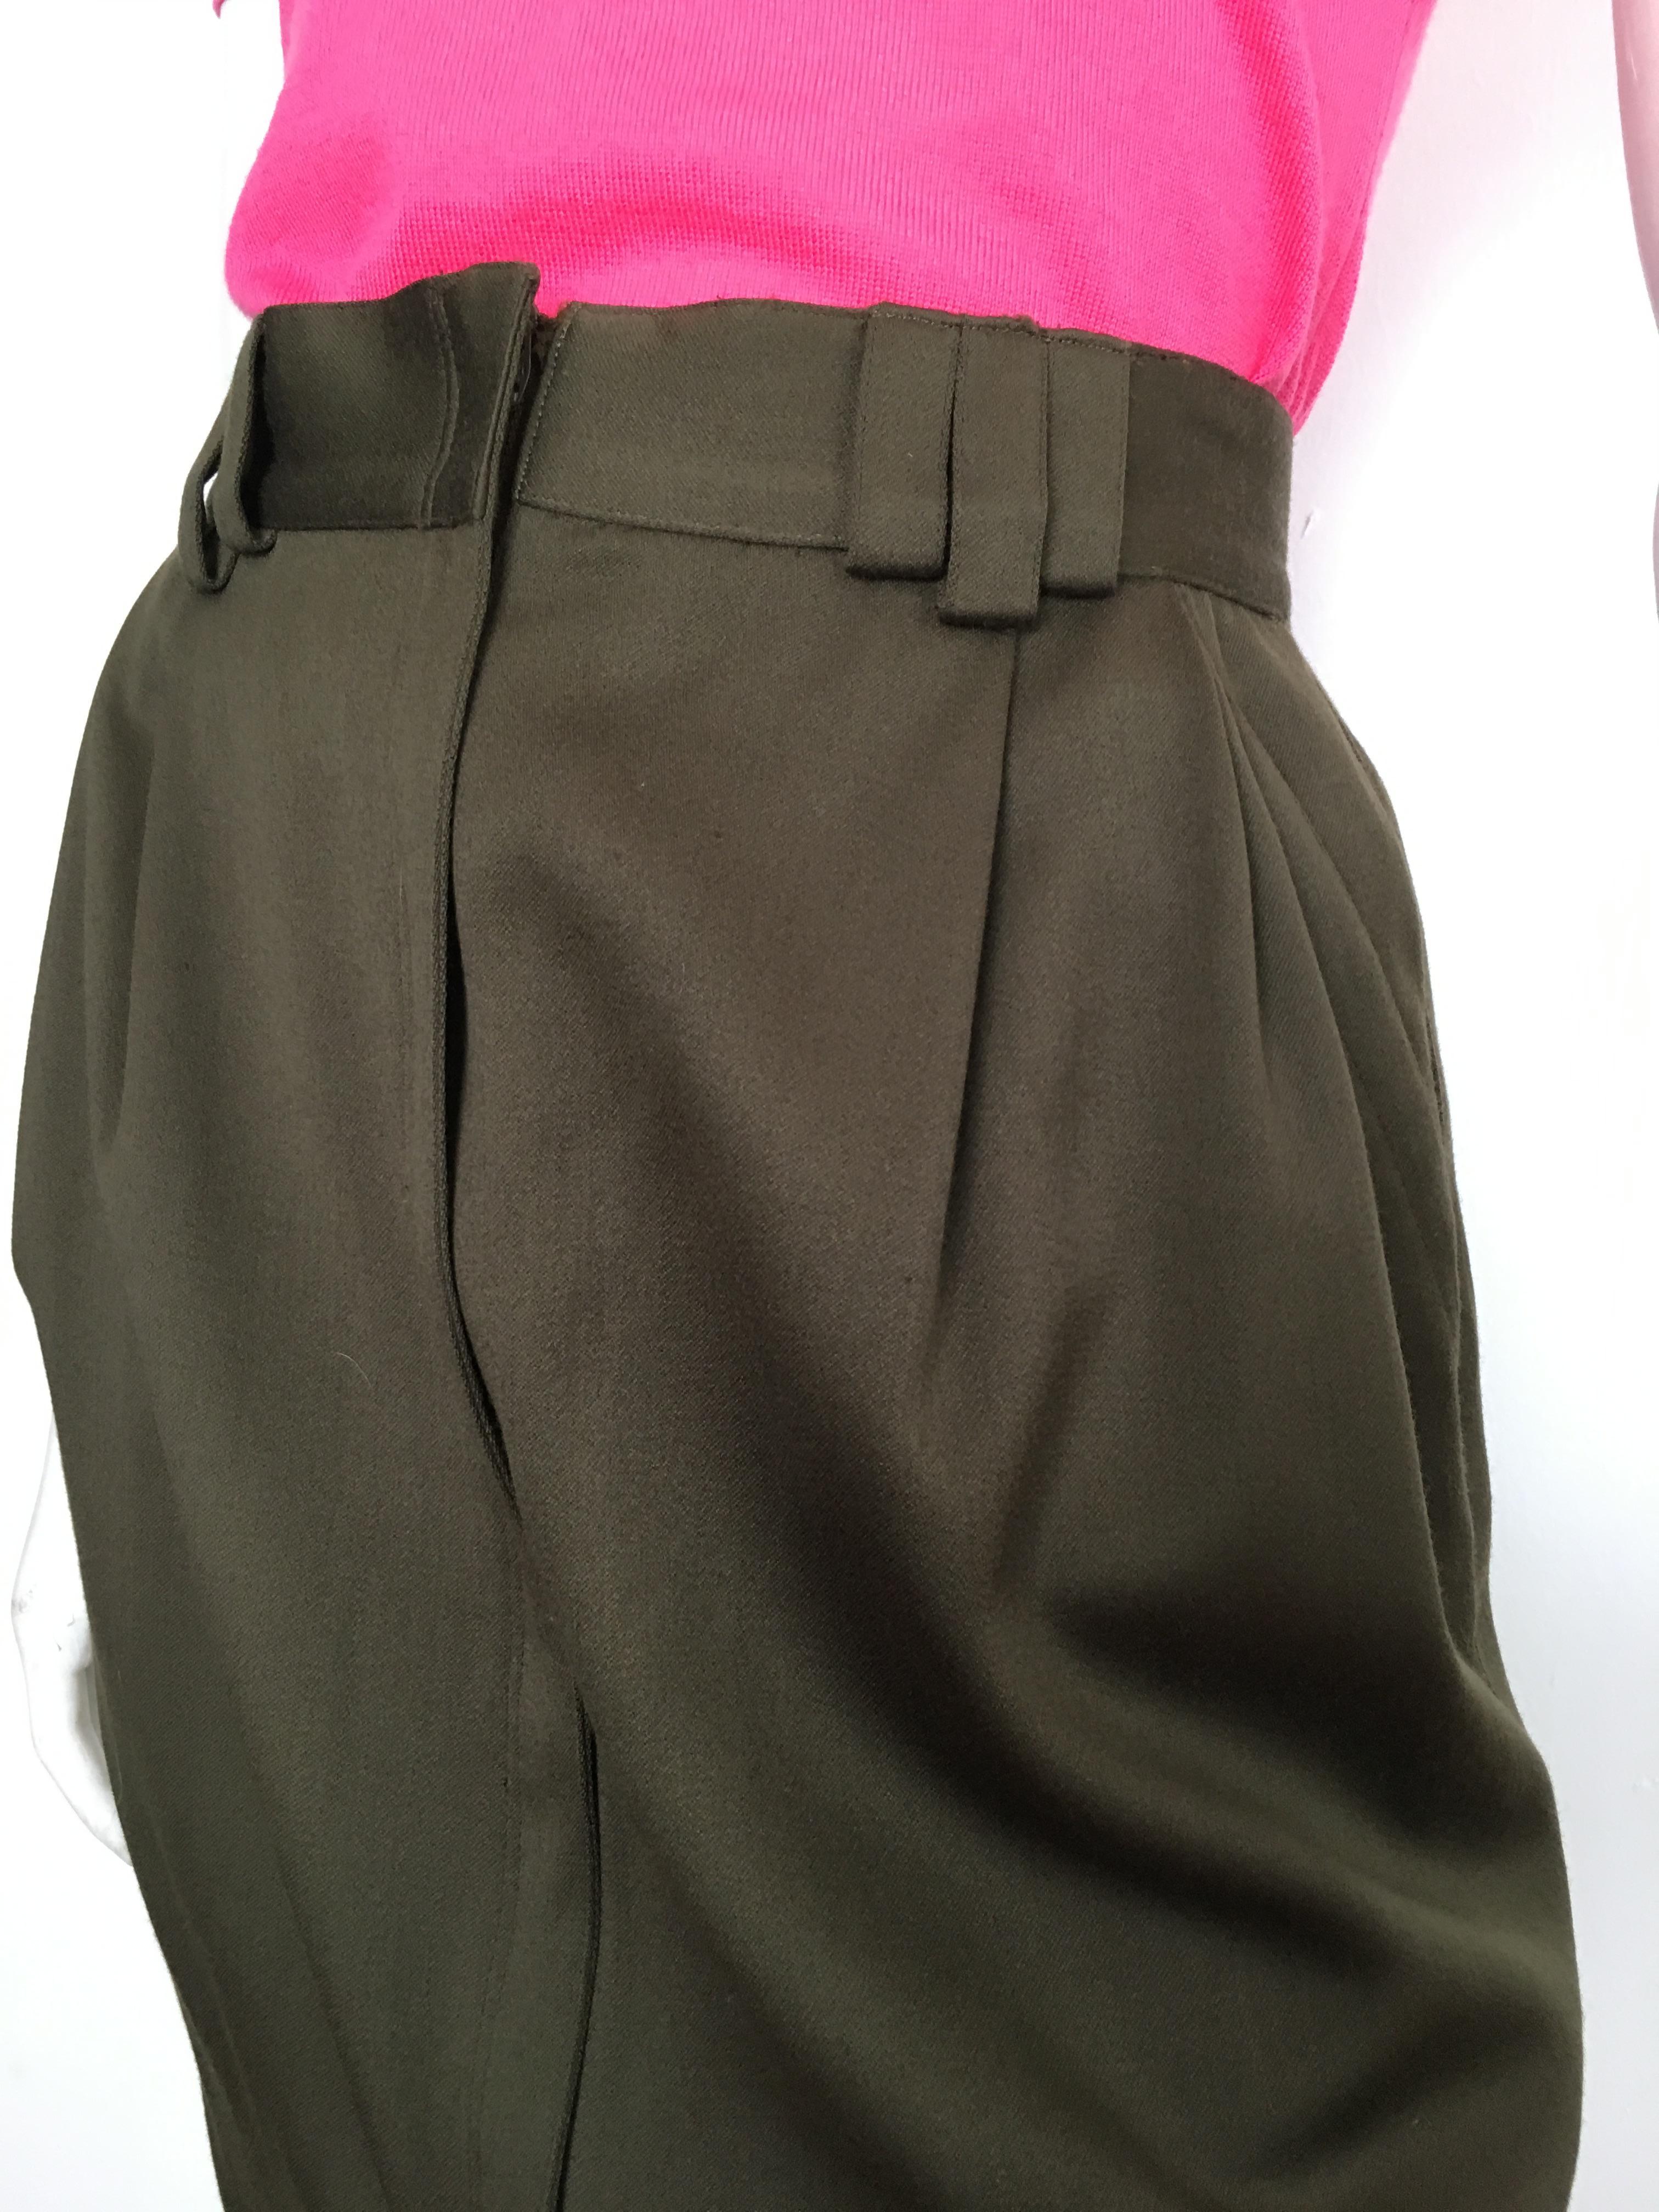 Gianni Versace 1980s Olive Wool Skirt with Pockets Size 6. For Sale 3